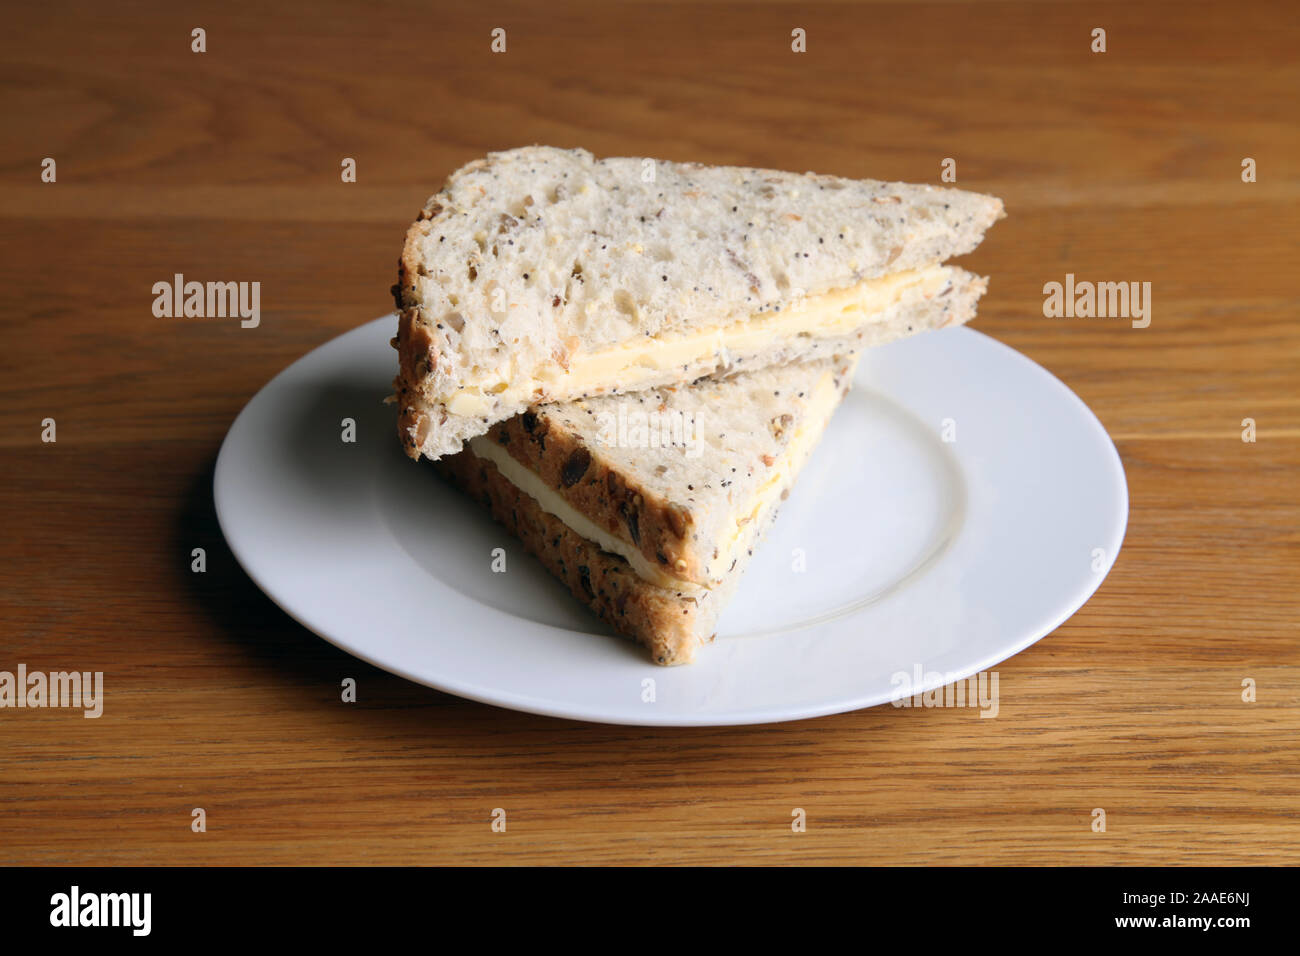 A Plain Cheese Sandwich served with multigrain bread cut in half on white plate on wooden dinner table Stock Photo